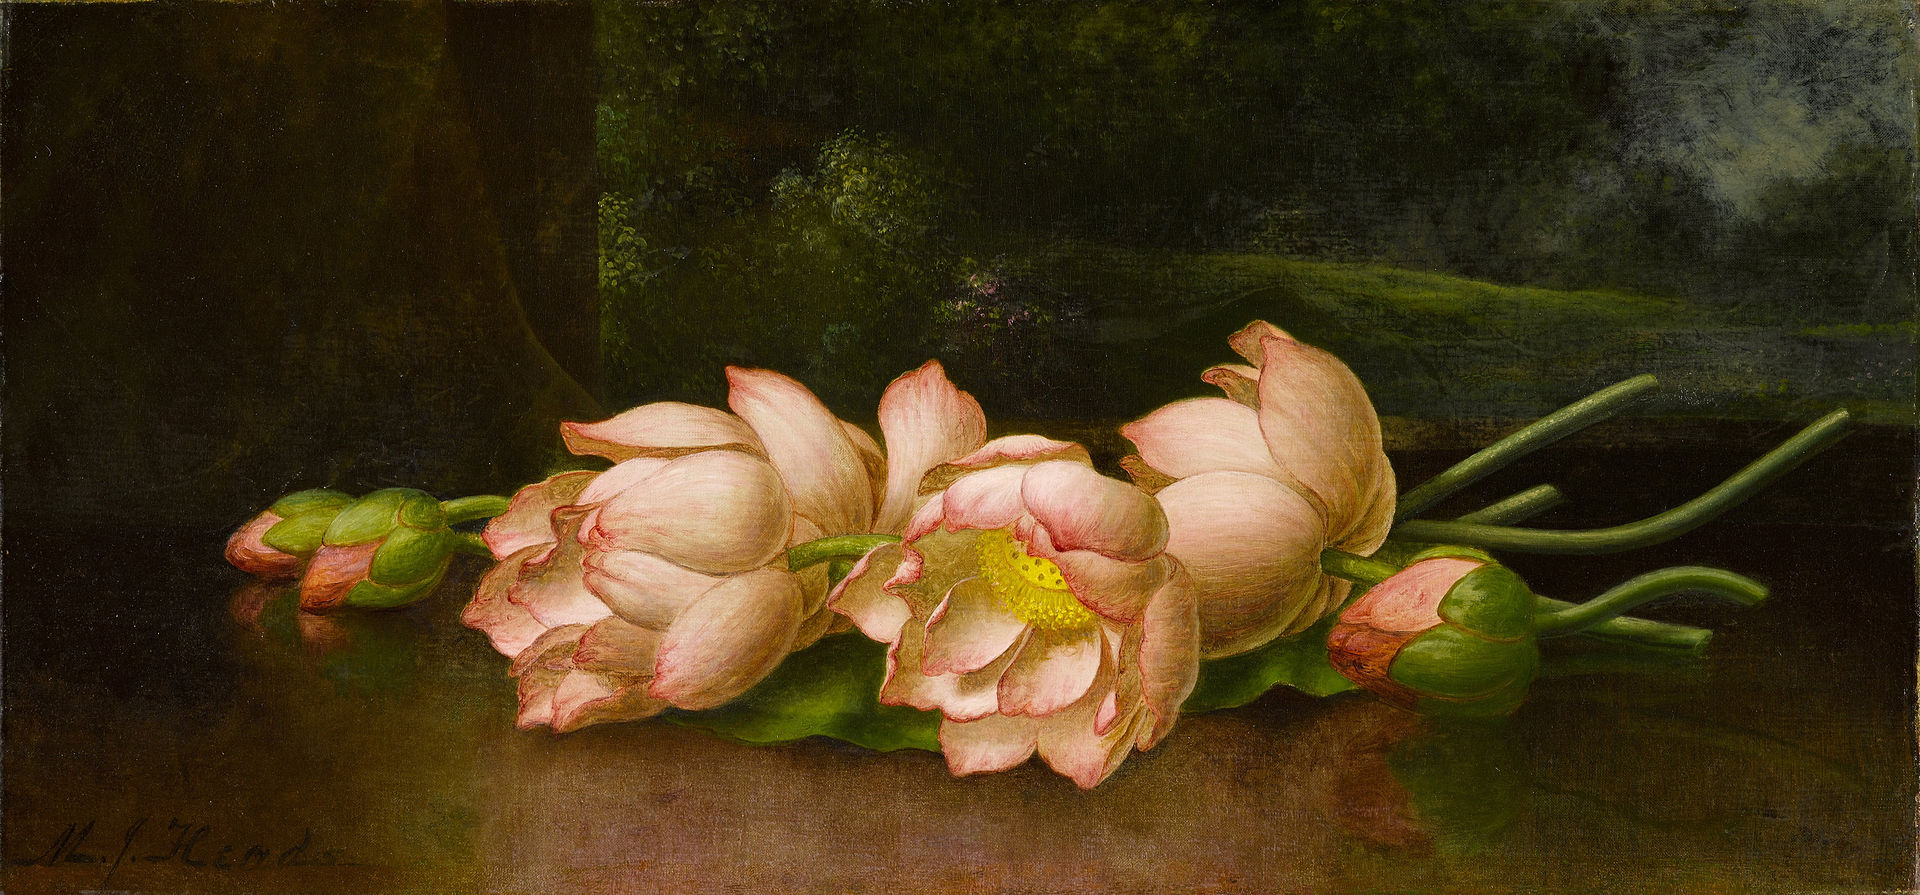 Lotus flowers with a landscape in the background